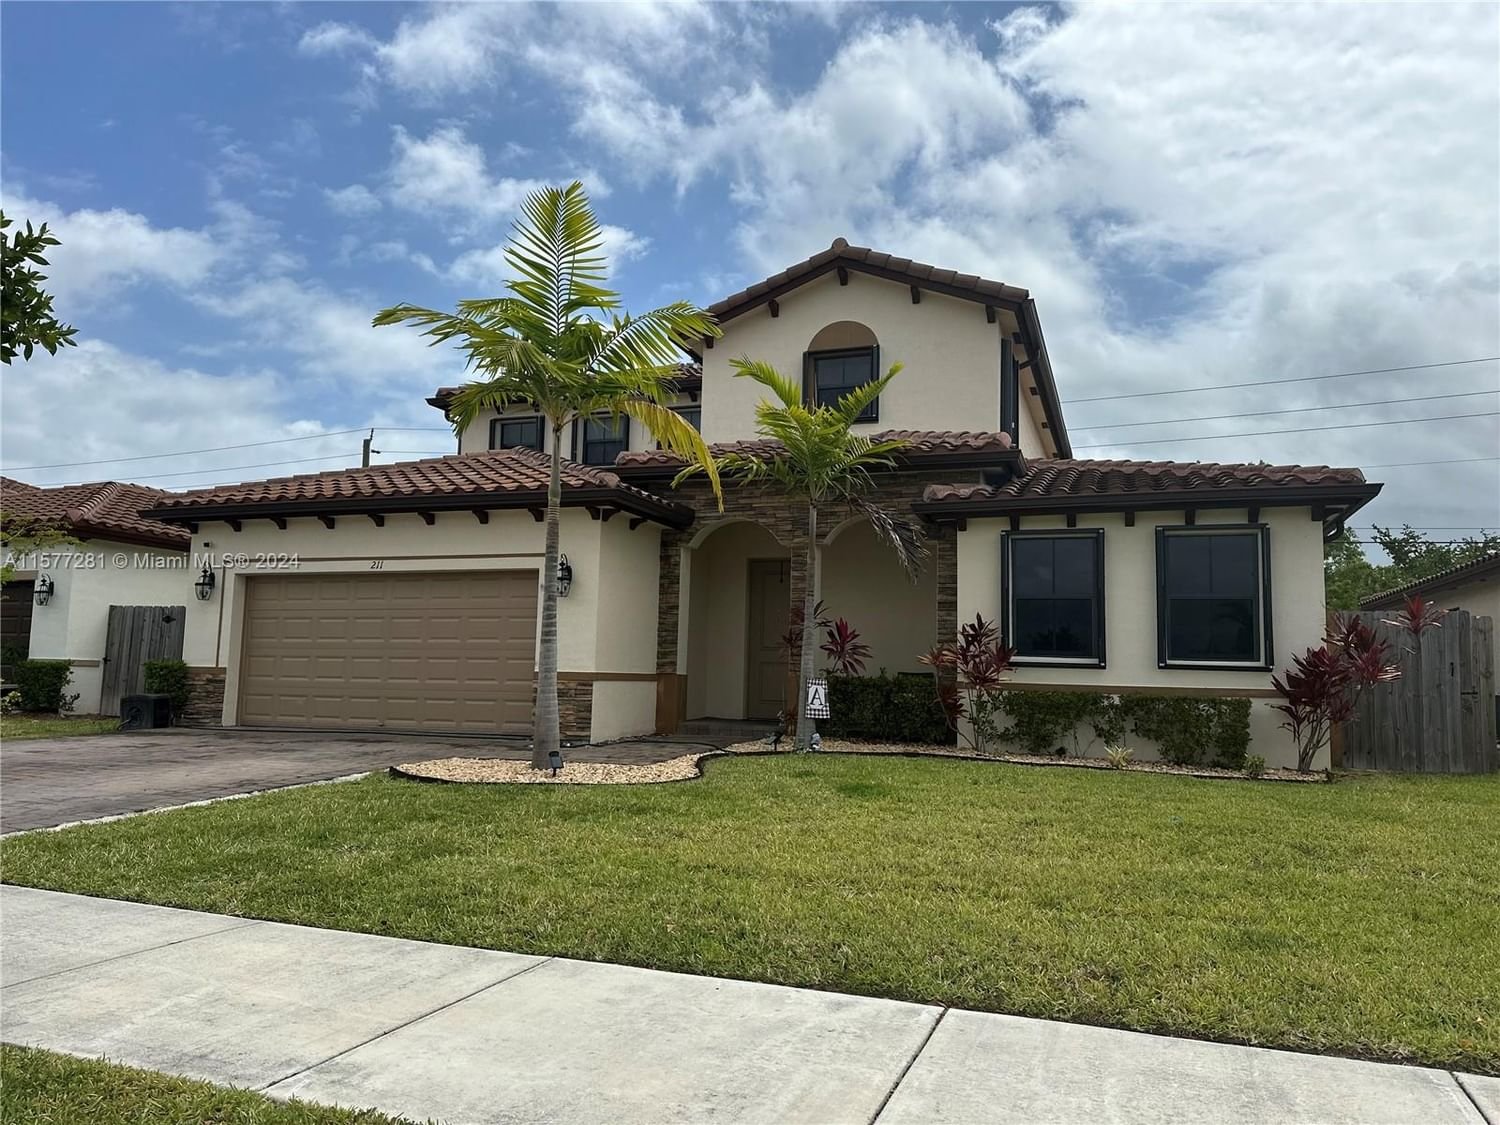 Real estate property located at 211 27th Ter, Miami-Dade County, KINGMAN COMMONS, Homestead, FL